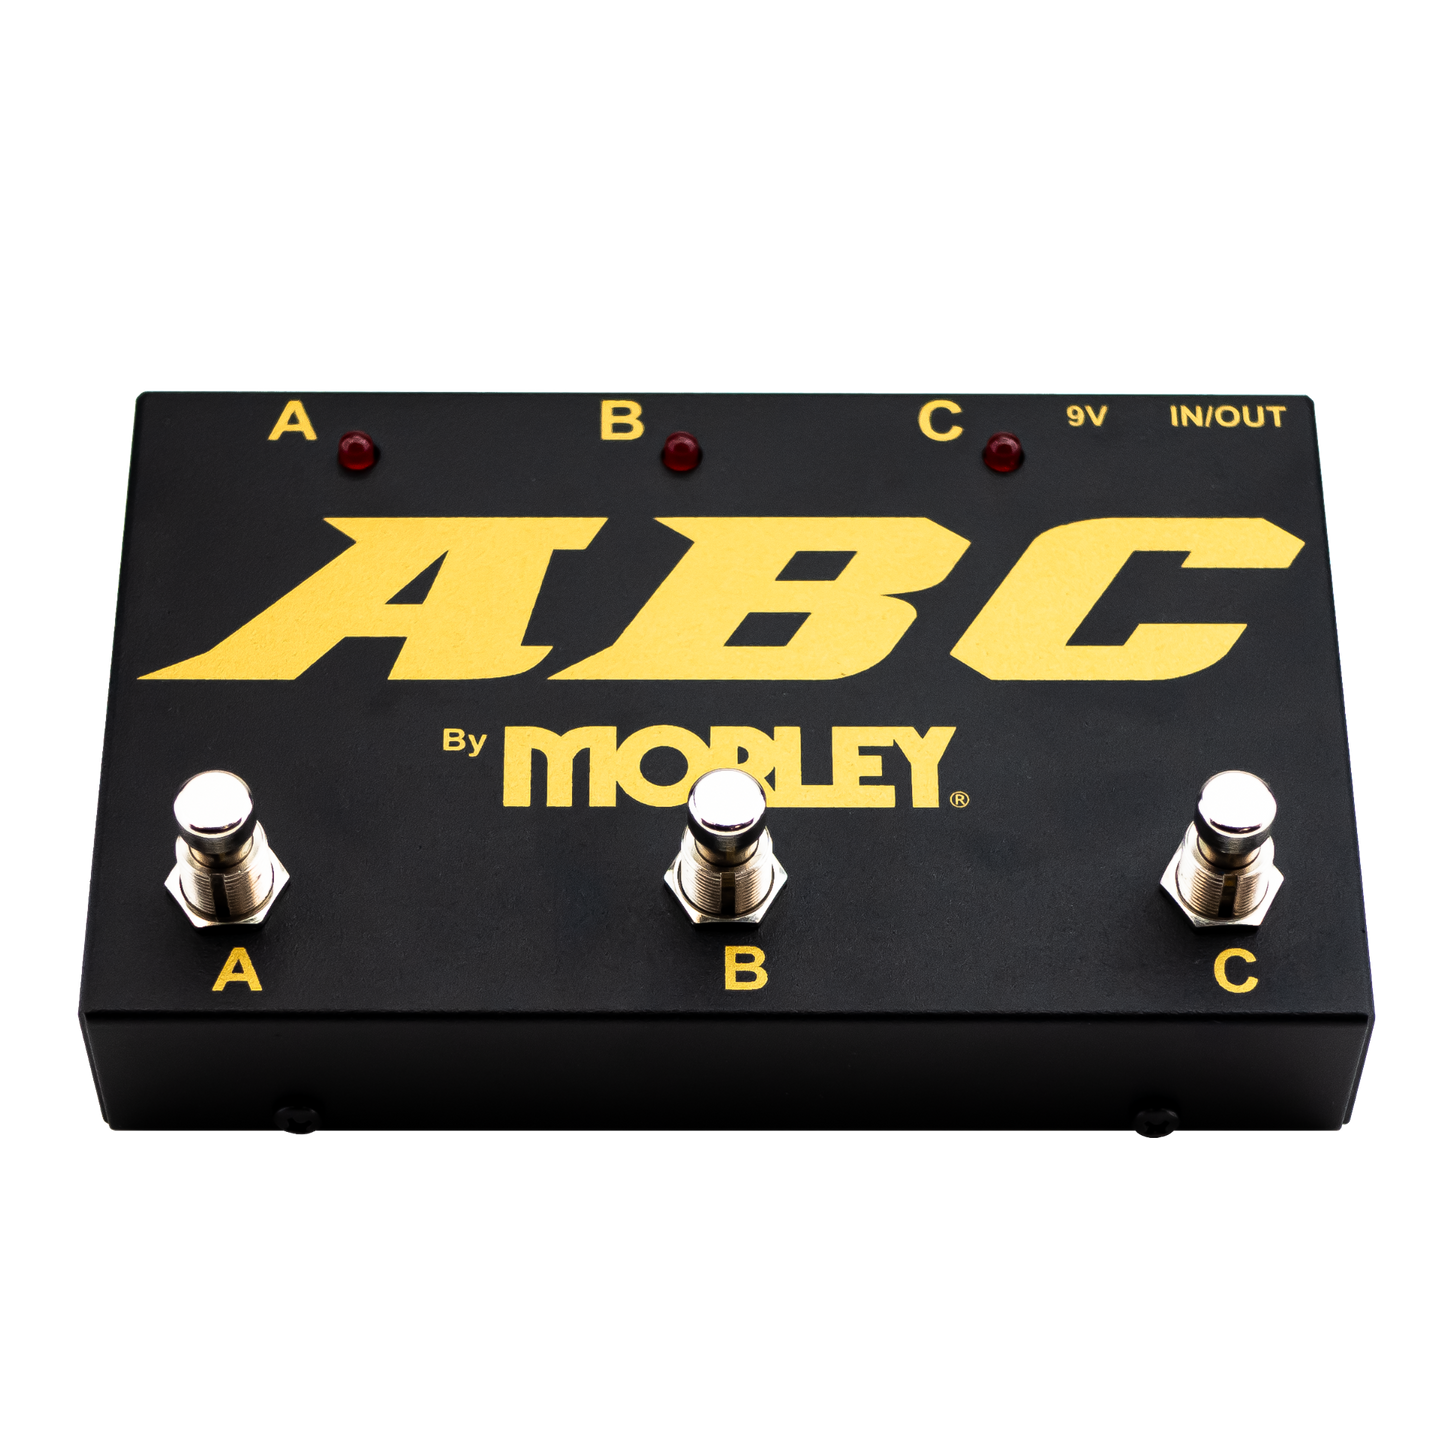 Morley Gold Series ABC 3-Button Switcher/Combiner Pedal